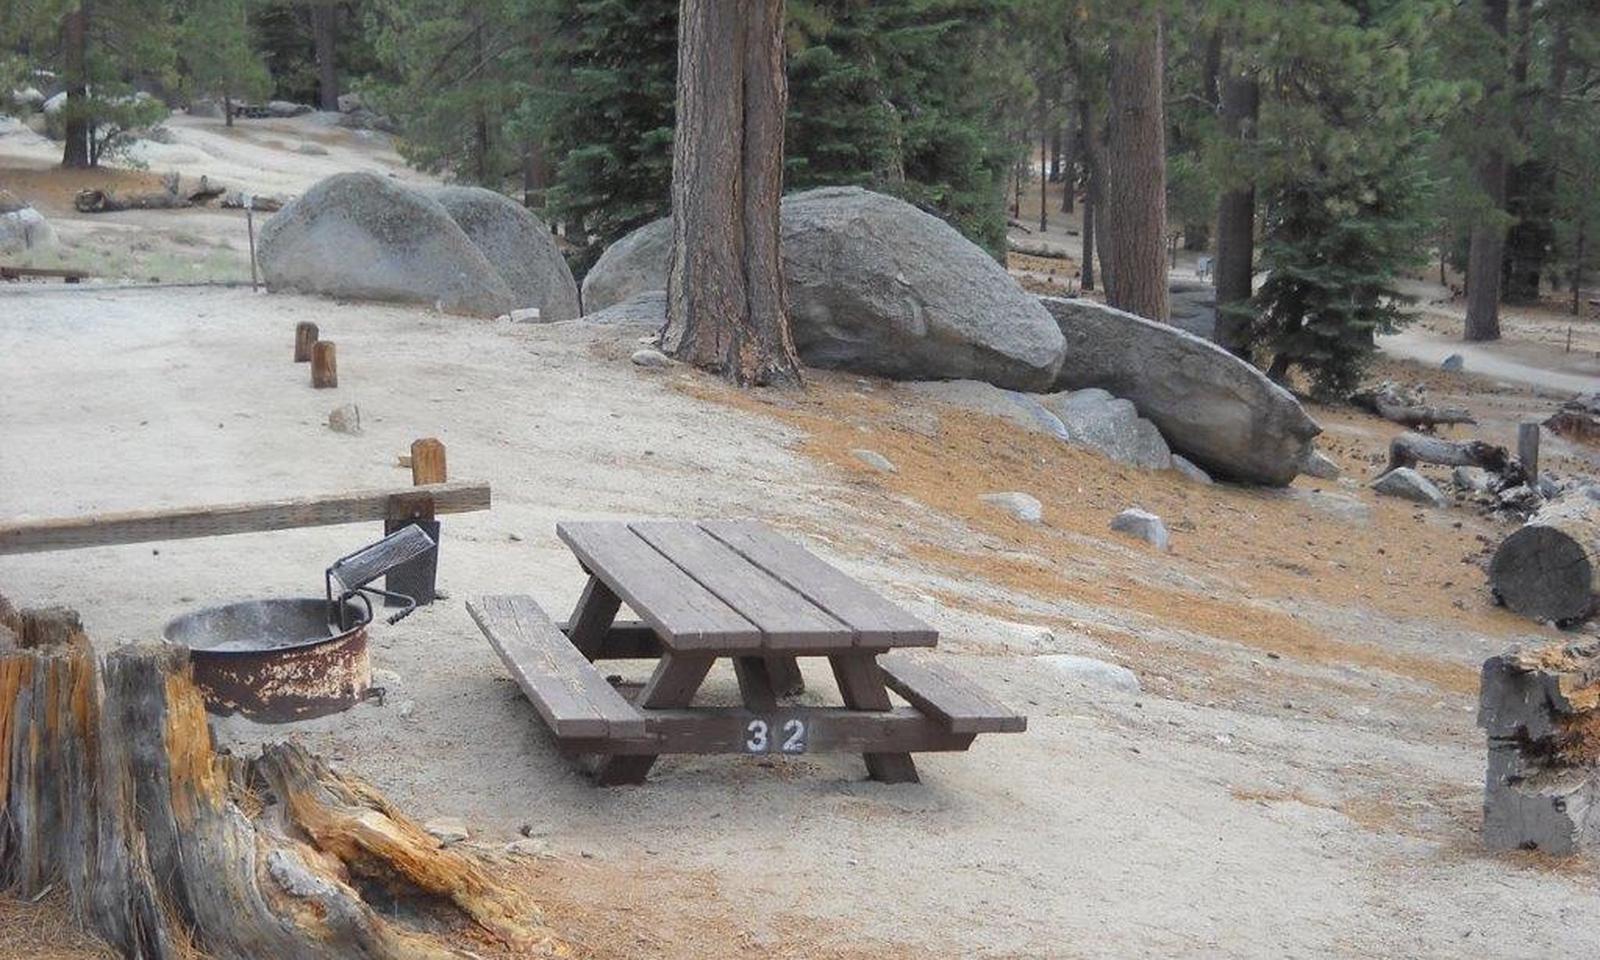 Boulder Basin campsite 32 with picnic table and fire pit.